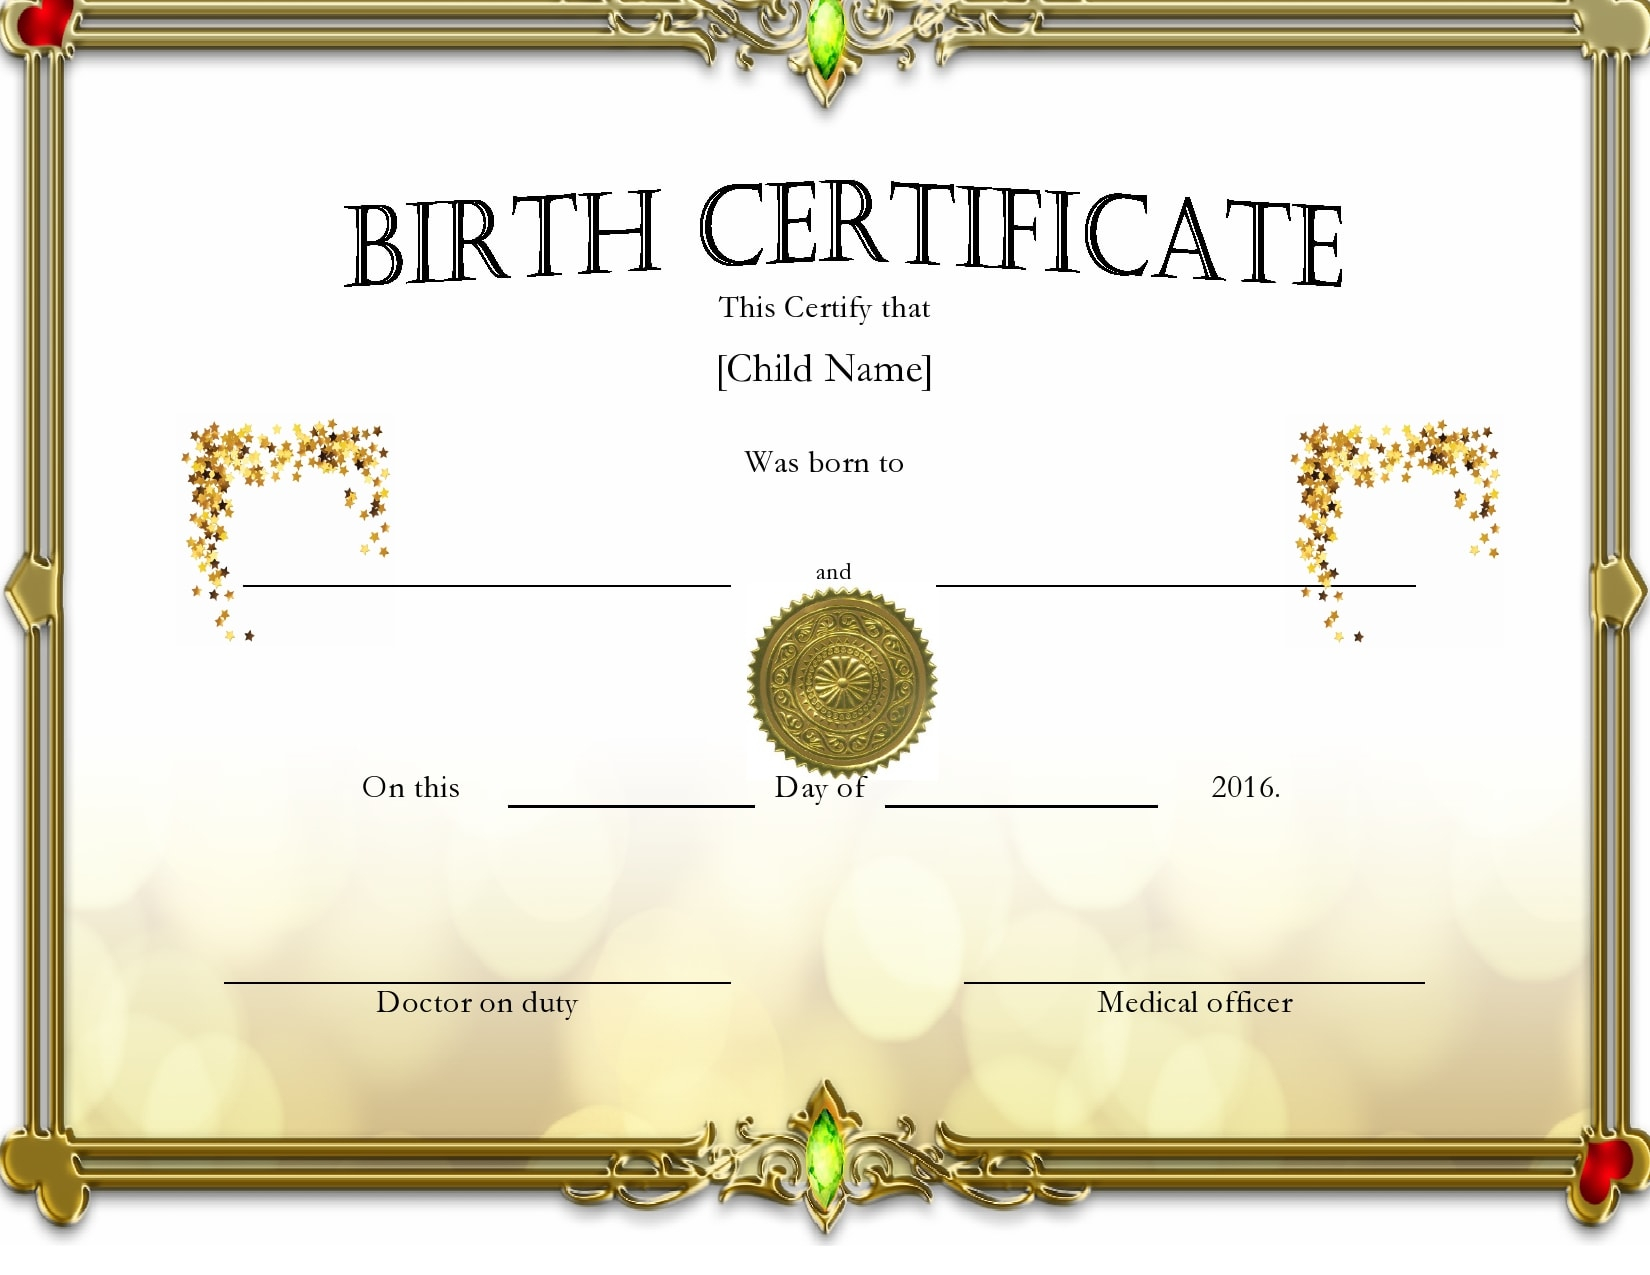 10 Blank Birth Certificate Templates (& Examples) - PrintableTemplates Pertaining To Baby Death Certificate Template